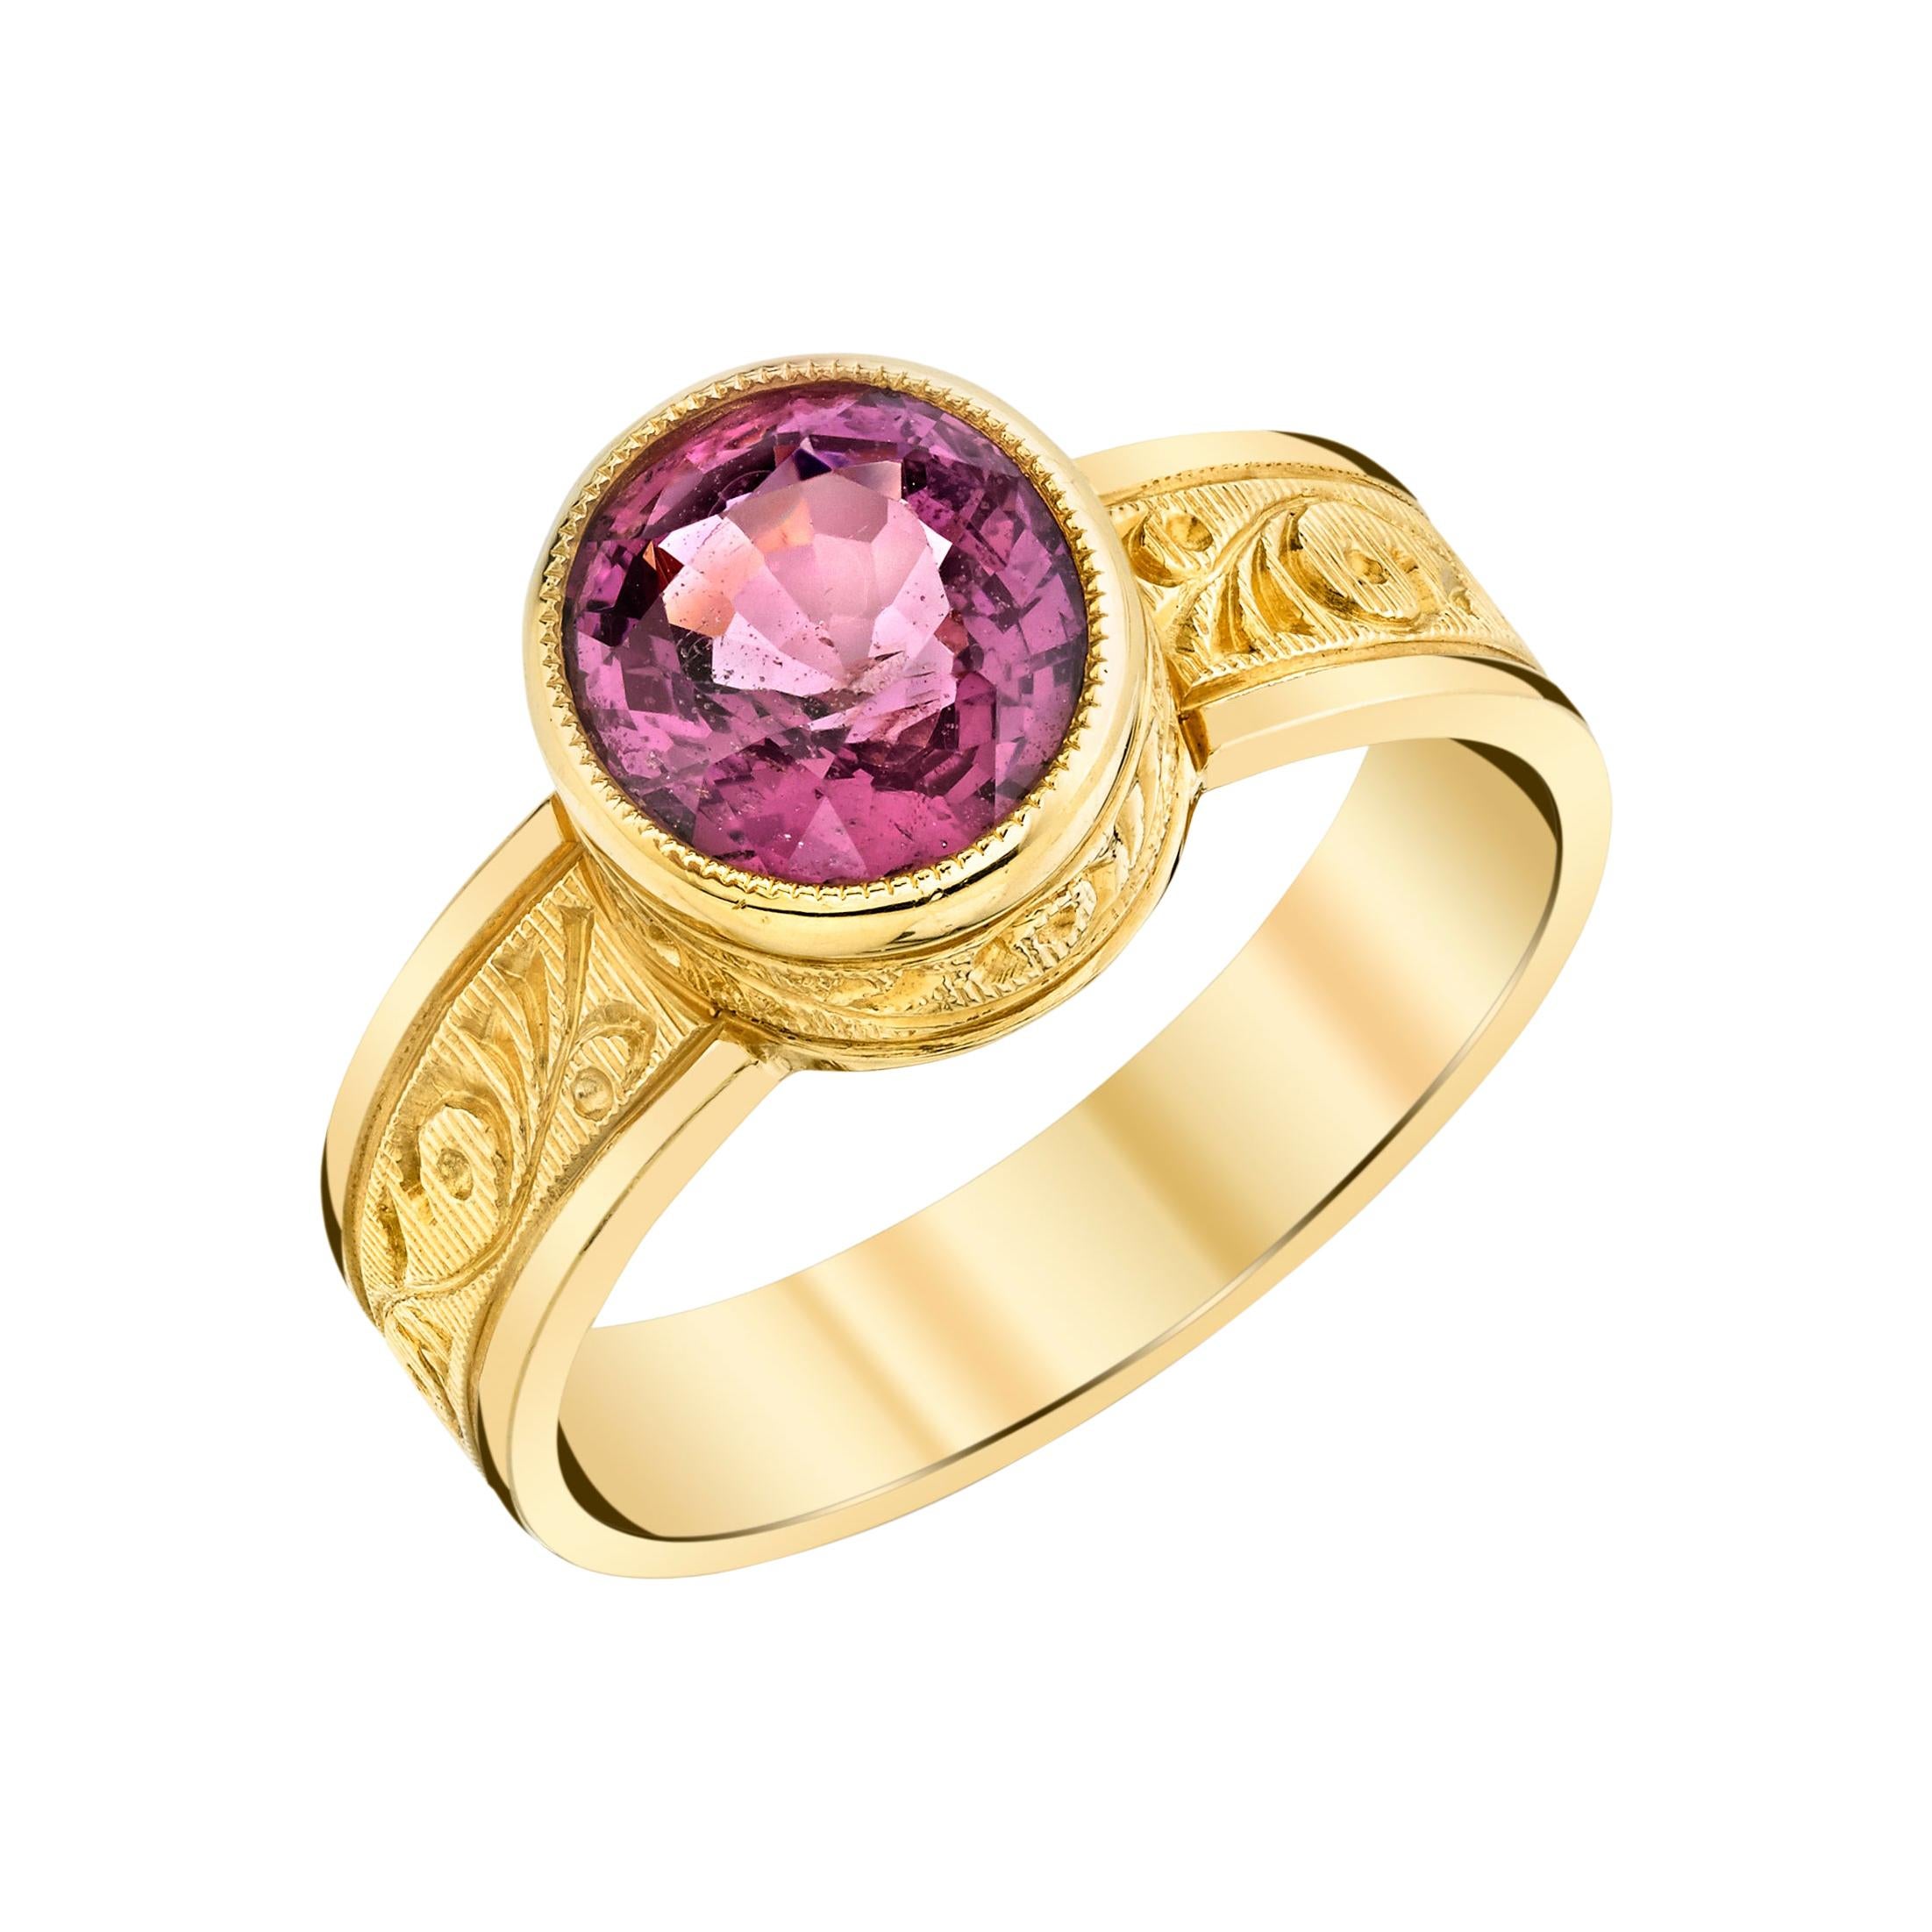 Pink Spinel and 18k Yellow Gold Hand-Engraved Band Ring, 1.93 Carats